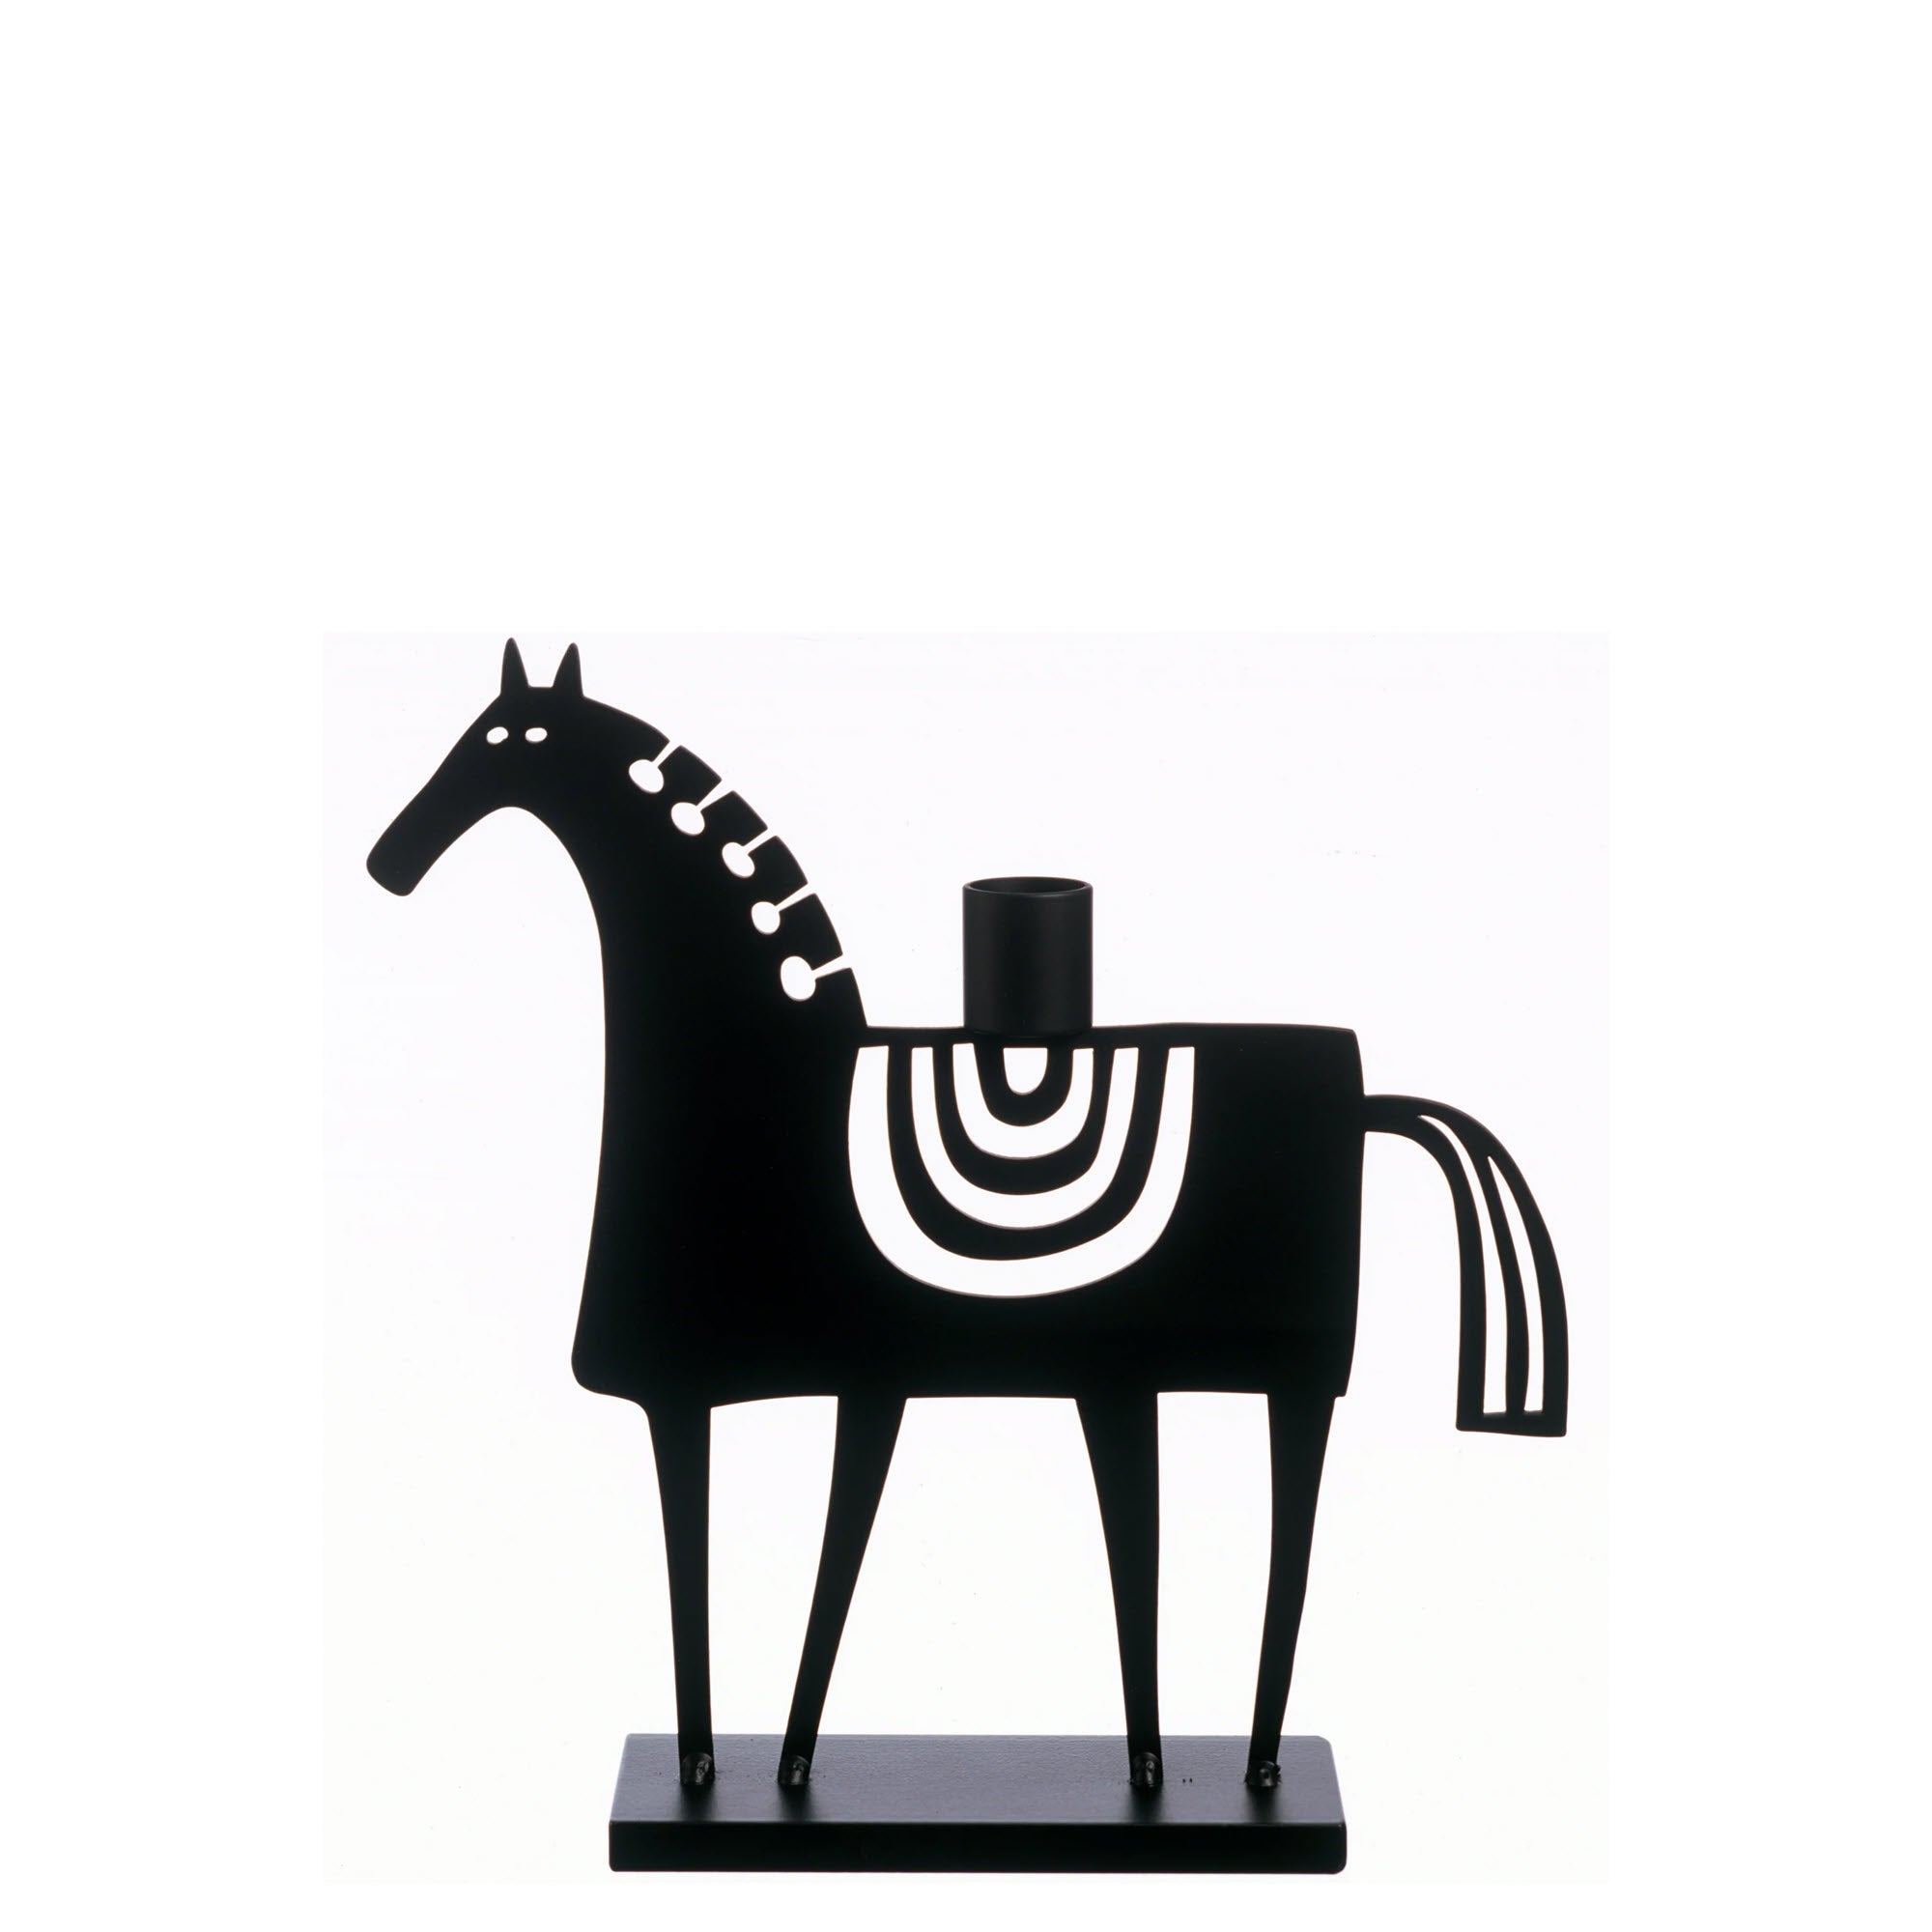 This image showcases a charming black iron candle holder fashioned in the shape of a horse. The whimsical design features intricate cut lines, including a saddle crafted with U-shaped cuts, a mane resembling a series of upside-down lollipops, and a tail with delicate lines resembling horse hair. Radiating with whimsy and decorative appeal, this piece adds a delightful touch to any table or shelf. It features space for one taper candle positioned at the center of the horse's back.